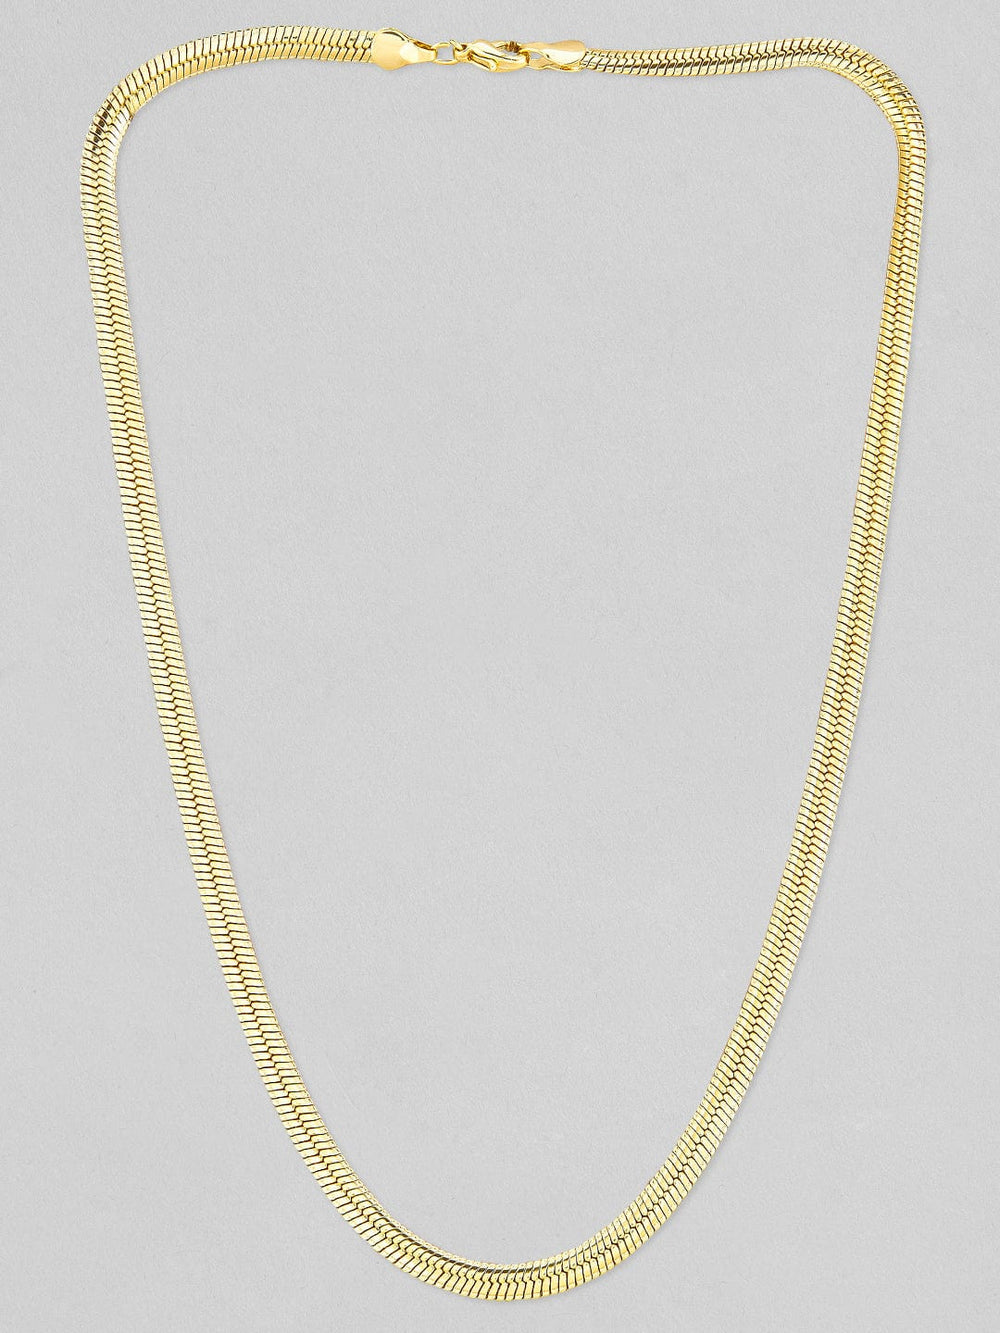 Rubans Voguish 22K Gold Plated Handcrafted Chain Necklace Chain & Necklaces